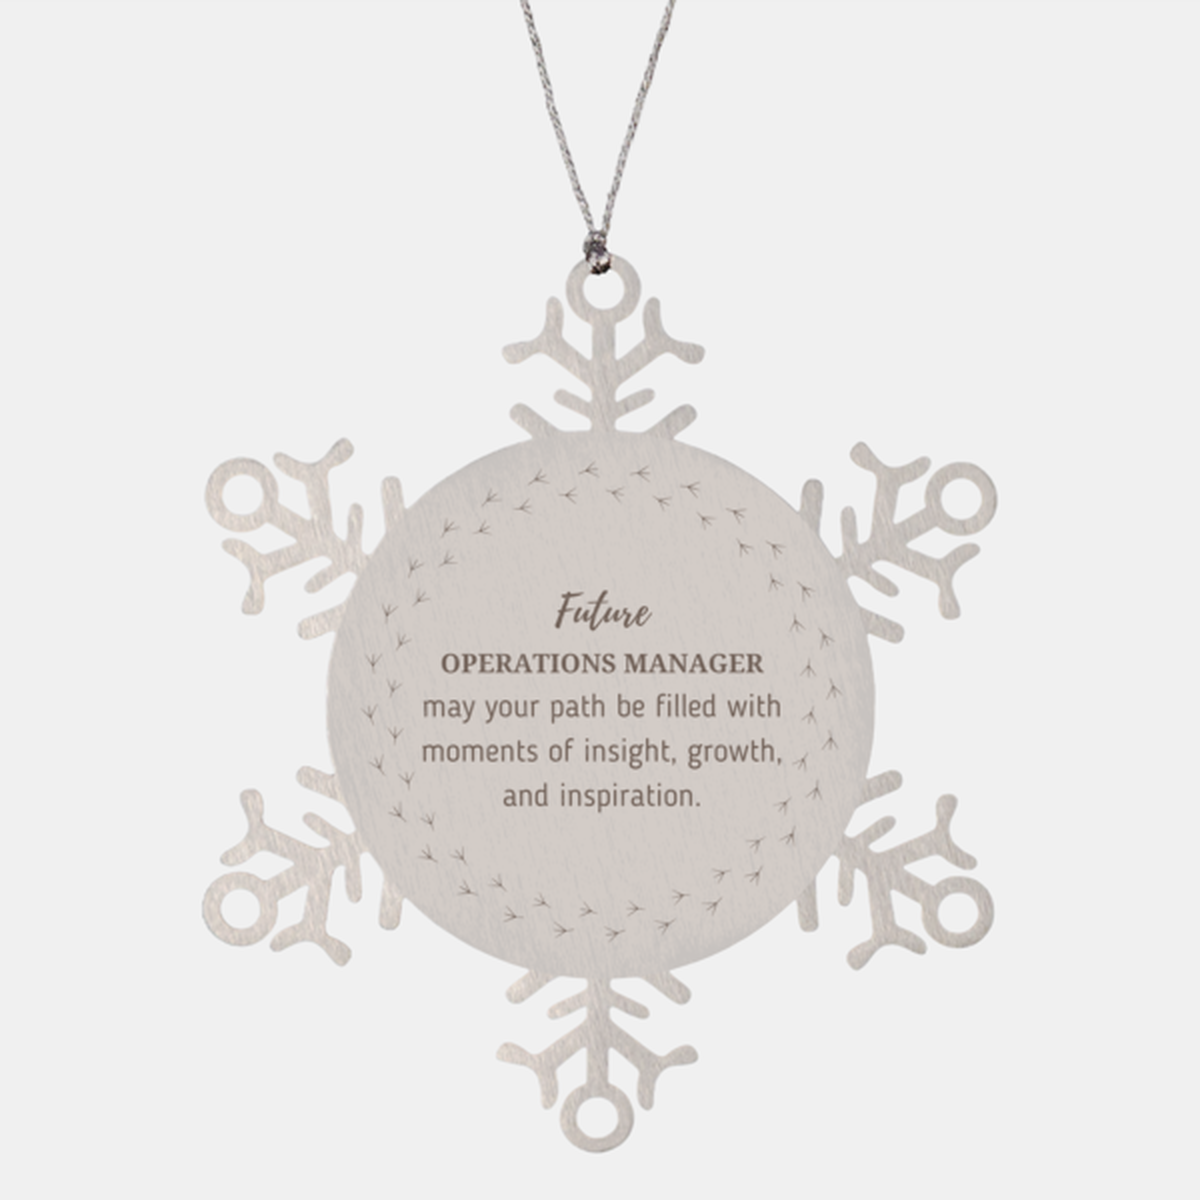 Future Operations Manager Gifts, May your path be filled with moments of insight, Graduation Gifts for New Operations Manager, Christmas Unique Snowflake Ornament For Men, Women, Friends